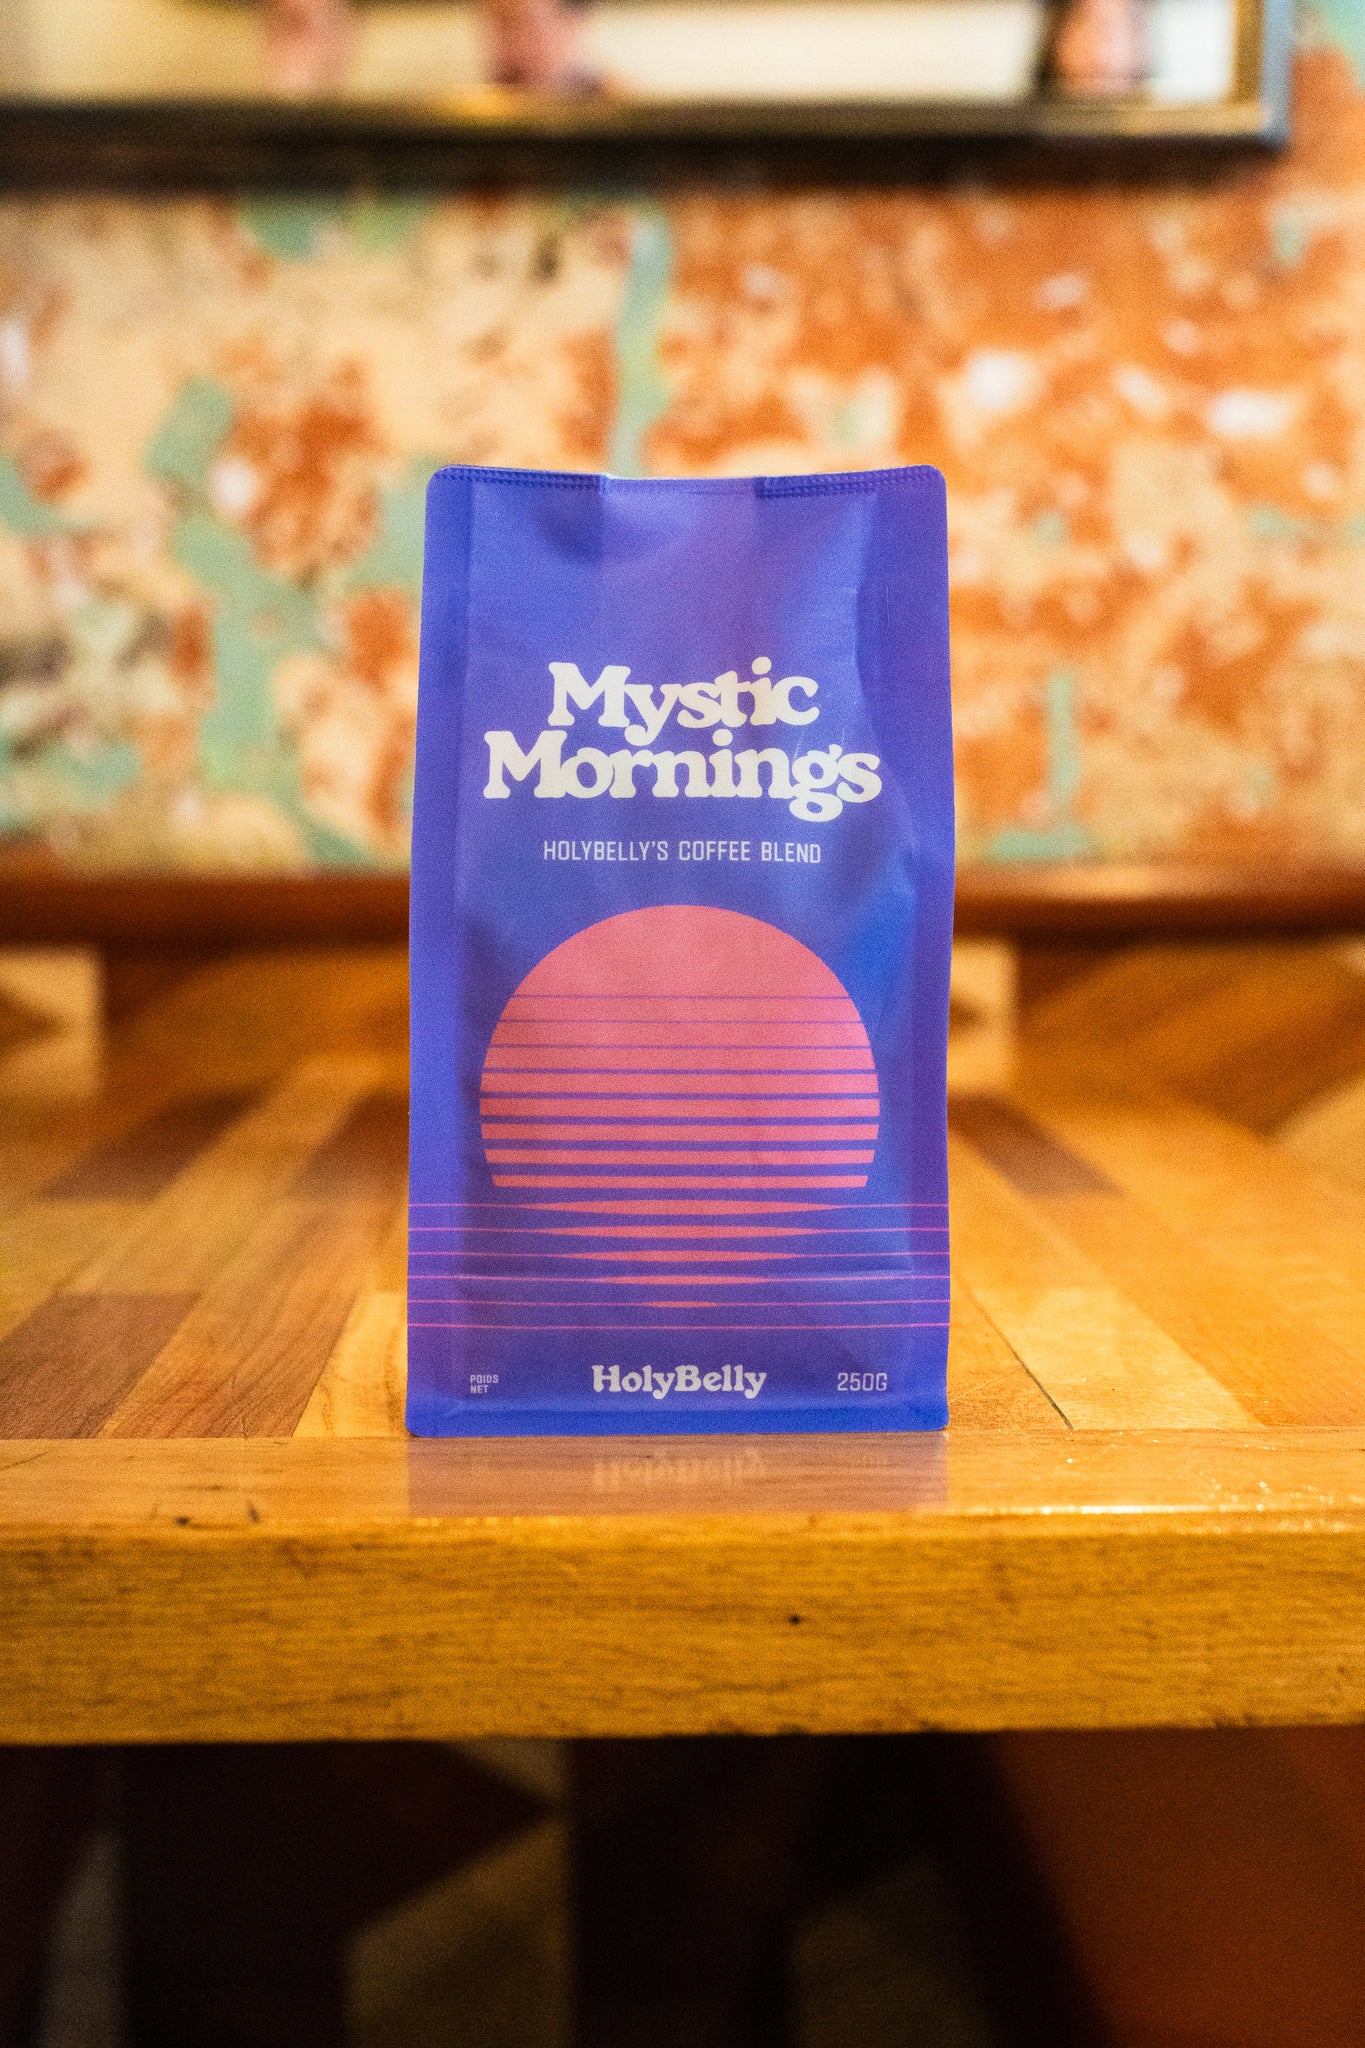 Holybelly Coffee Blend - Mystic Mornings 250g